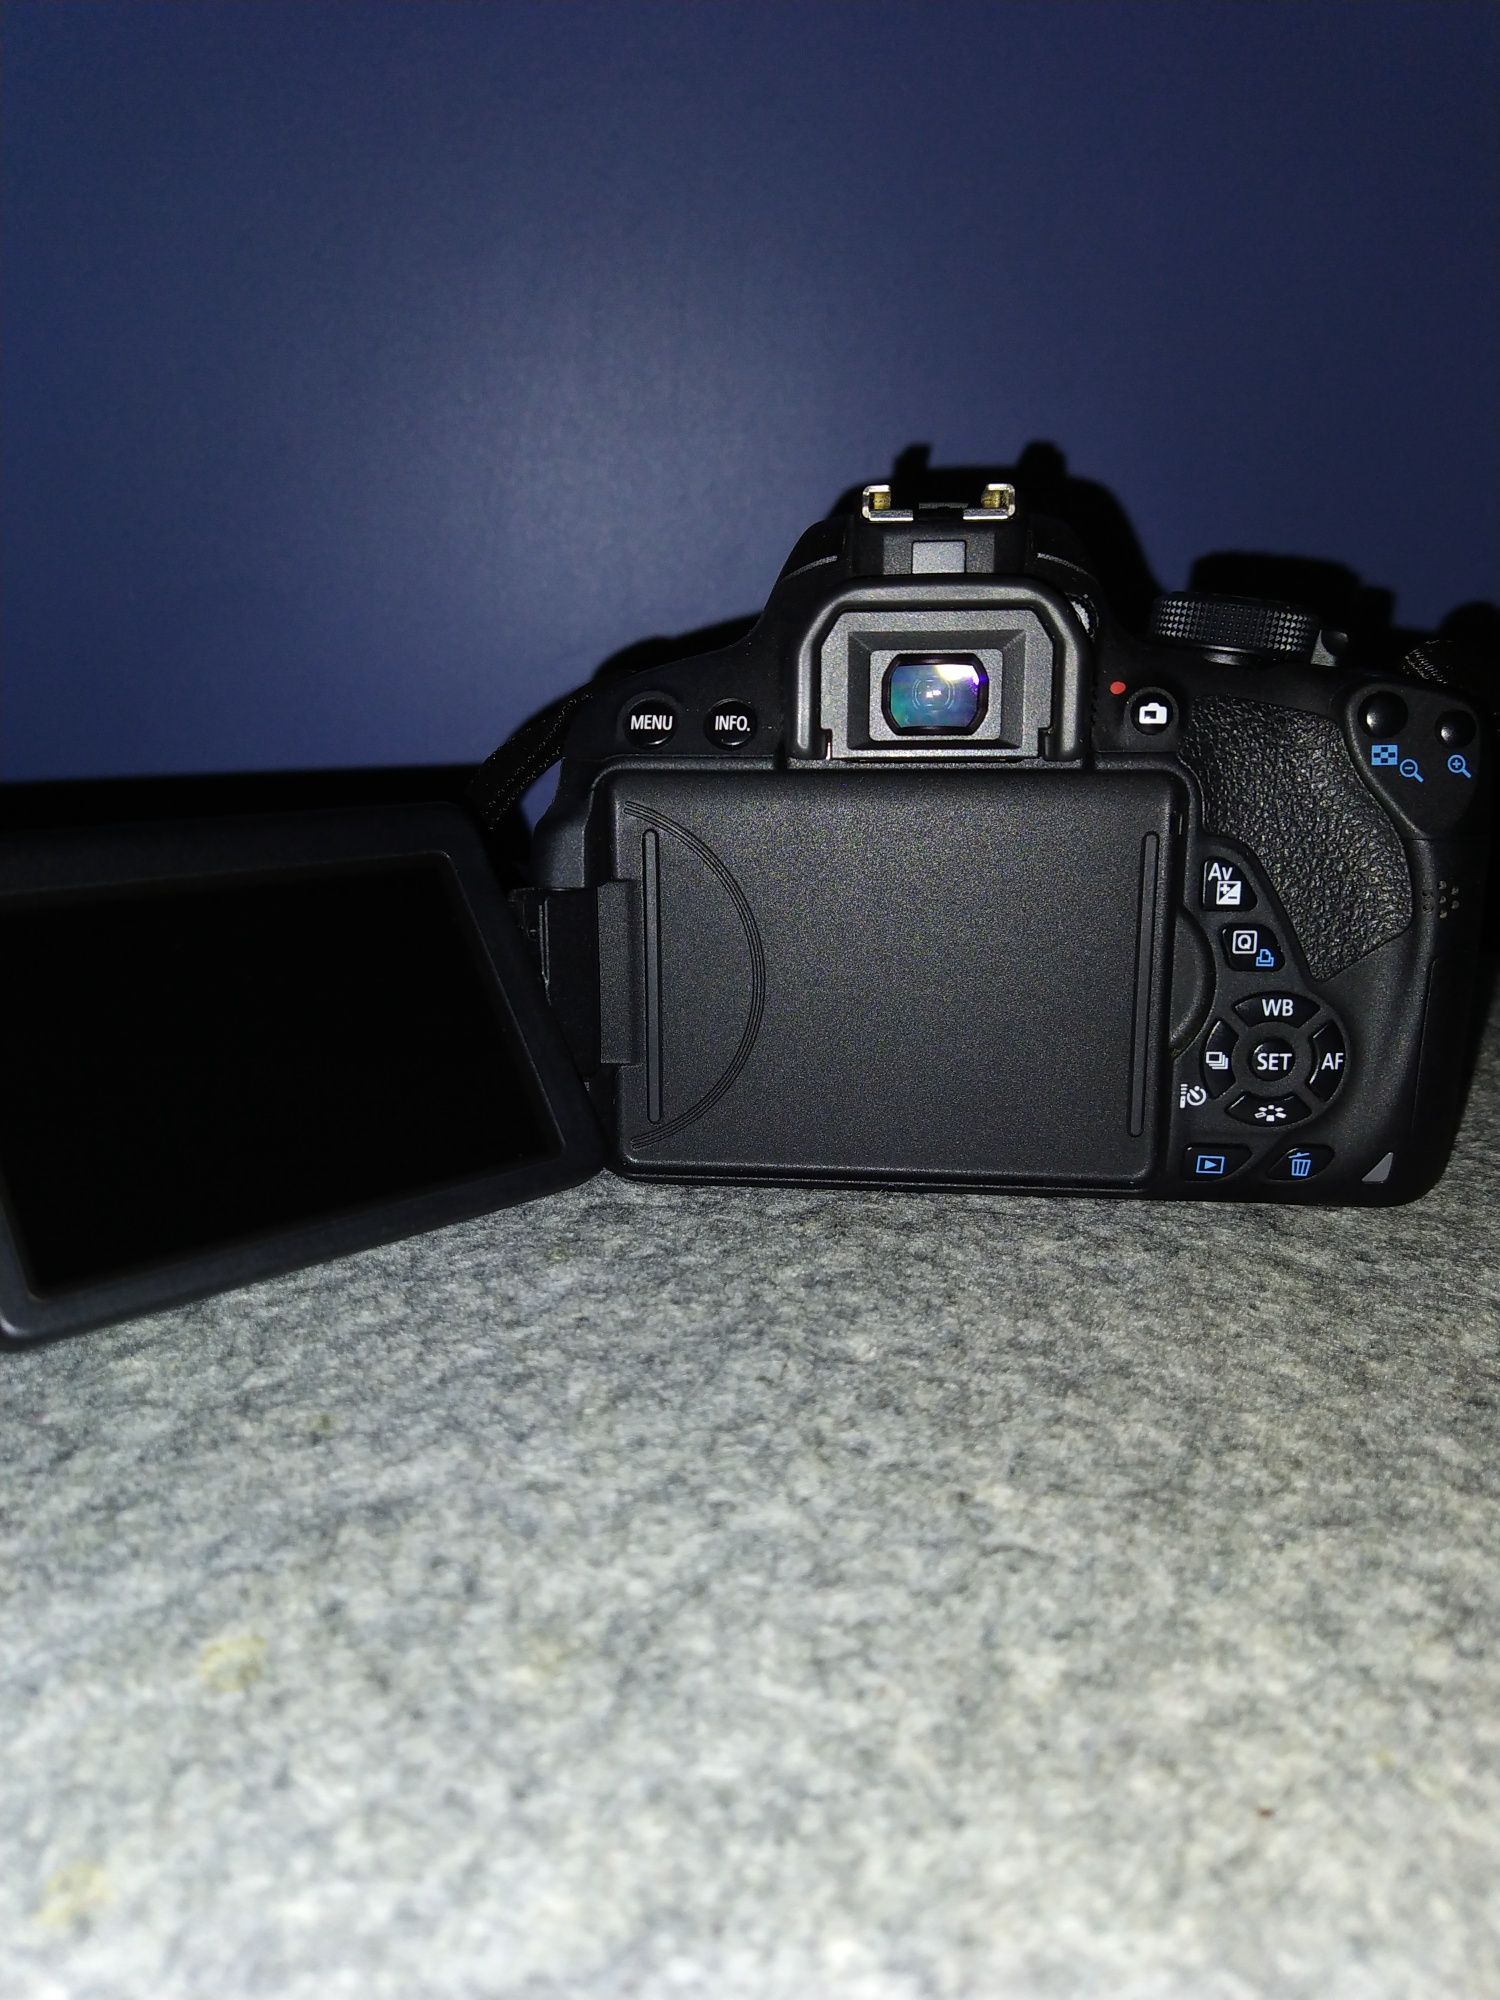 Canon EOS 700D kit (18-55mm) EF-S IS STM